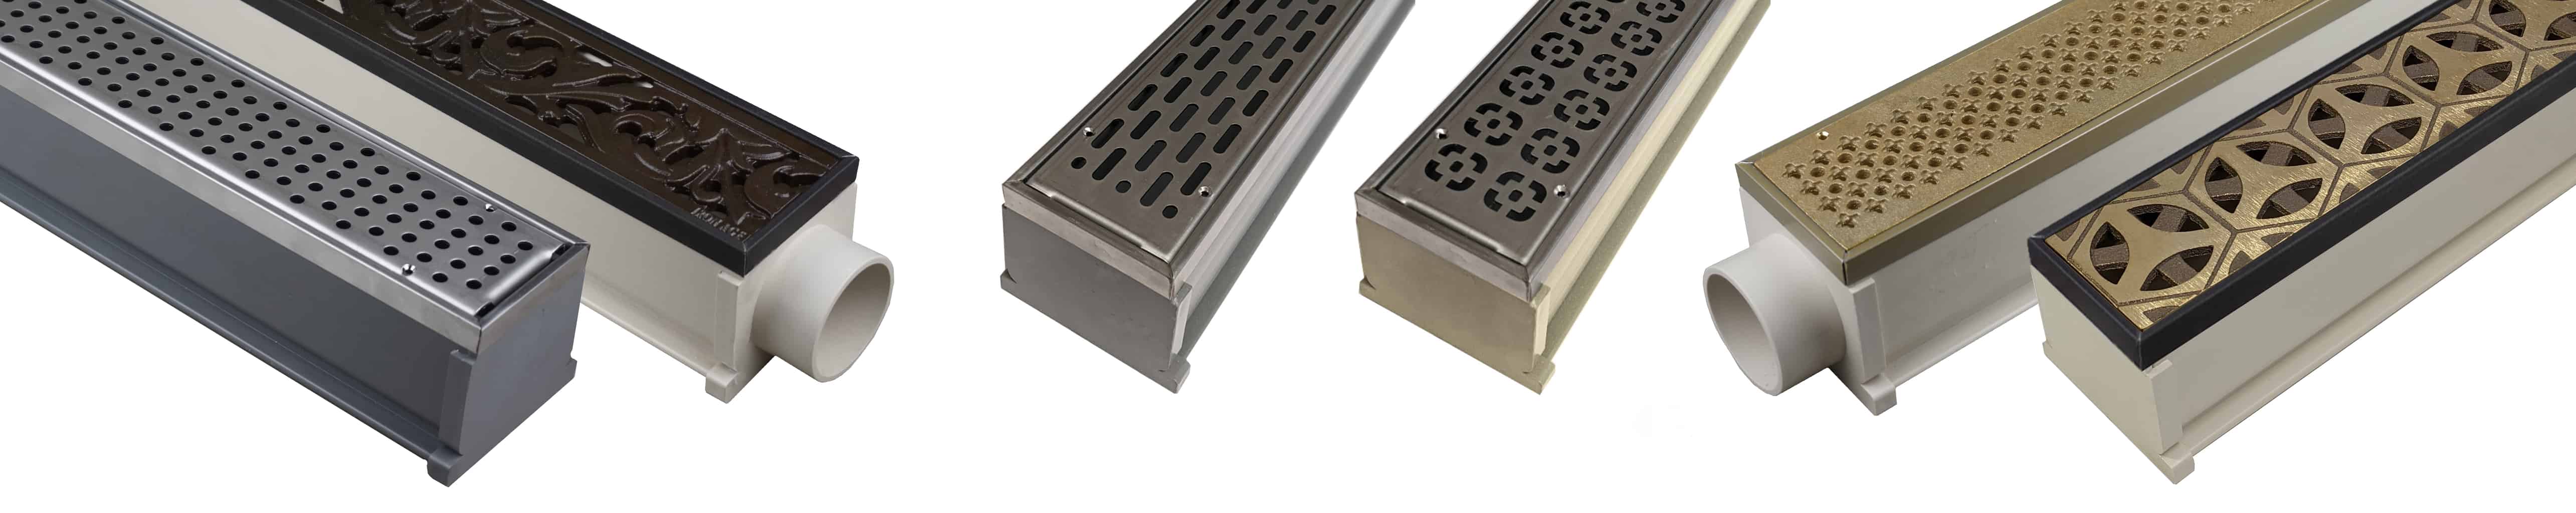 MAX Mini Group with Bronze and Stainless Steel Grates